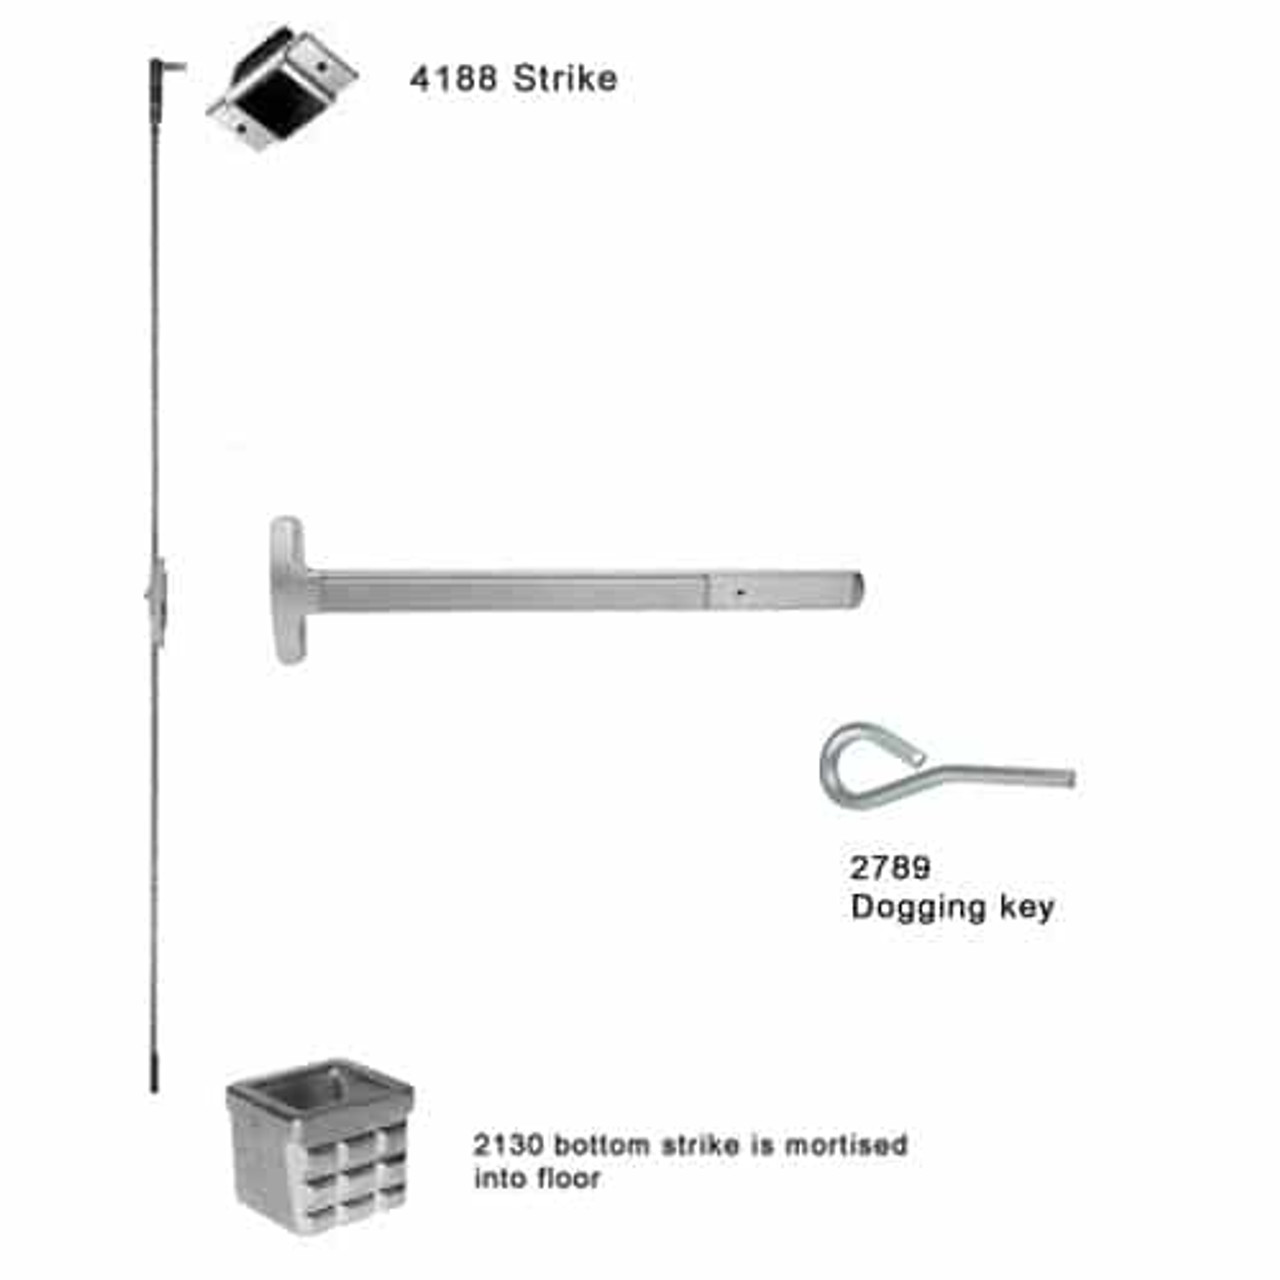 24-C-L-DT-DANE-US32-2-RHR Falcon 24 Series Concealed Vertical Rod Device 712L-DT Dane Lever with Dummy Trim in Polished Stainless Steel